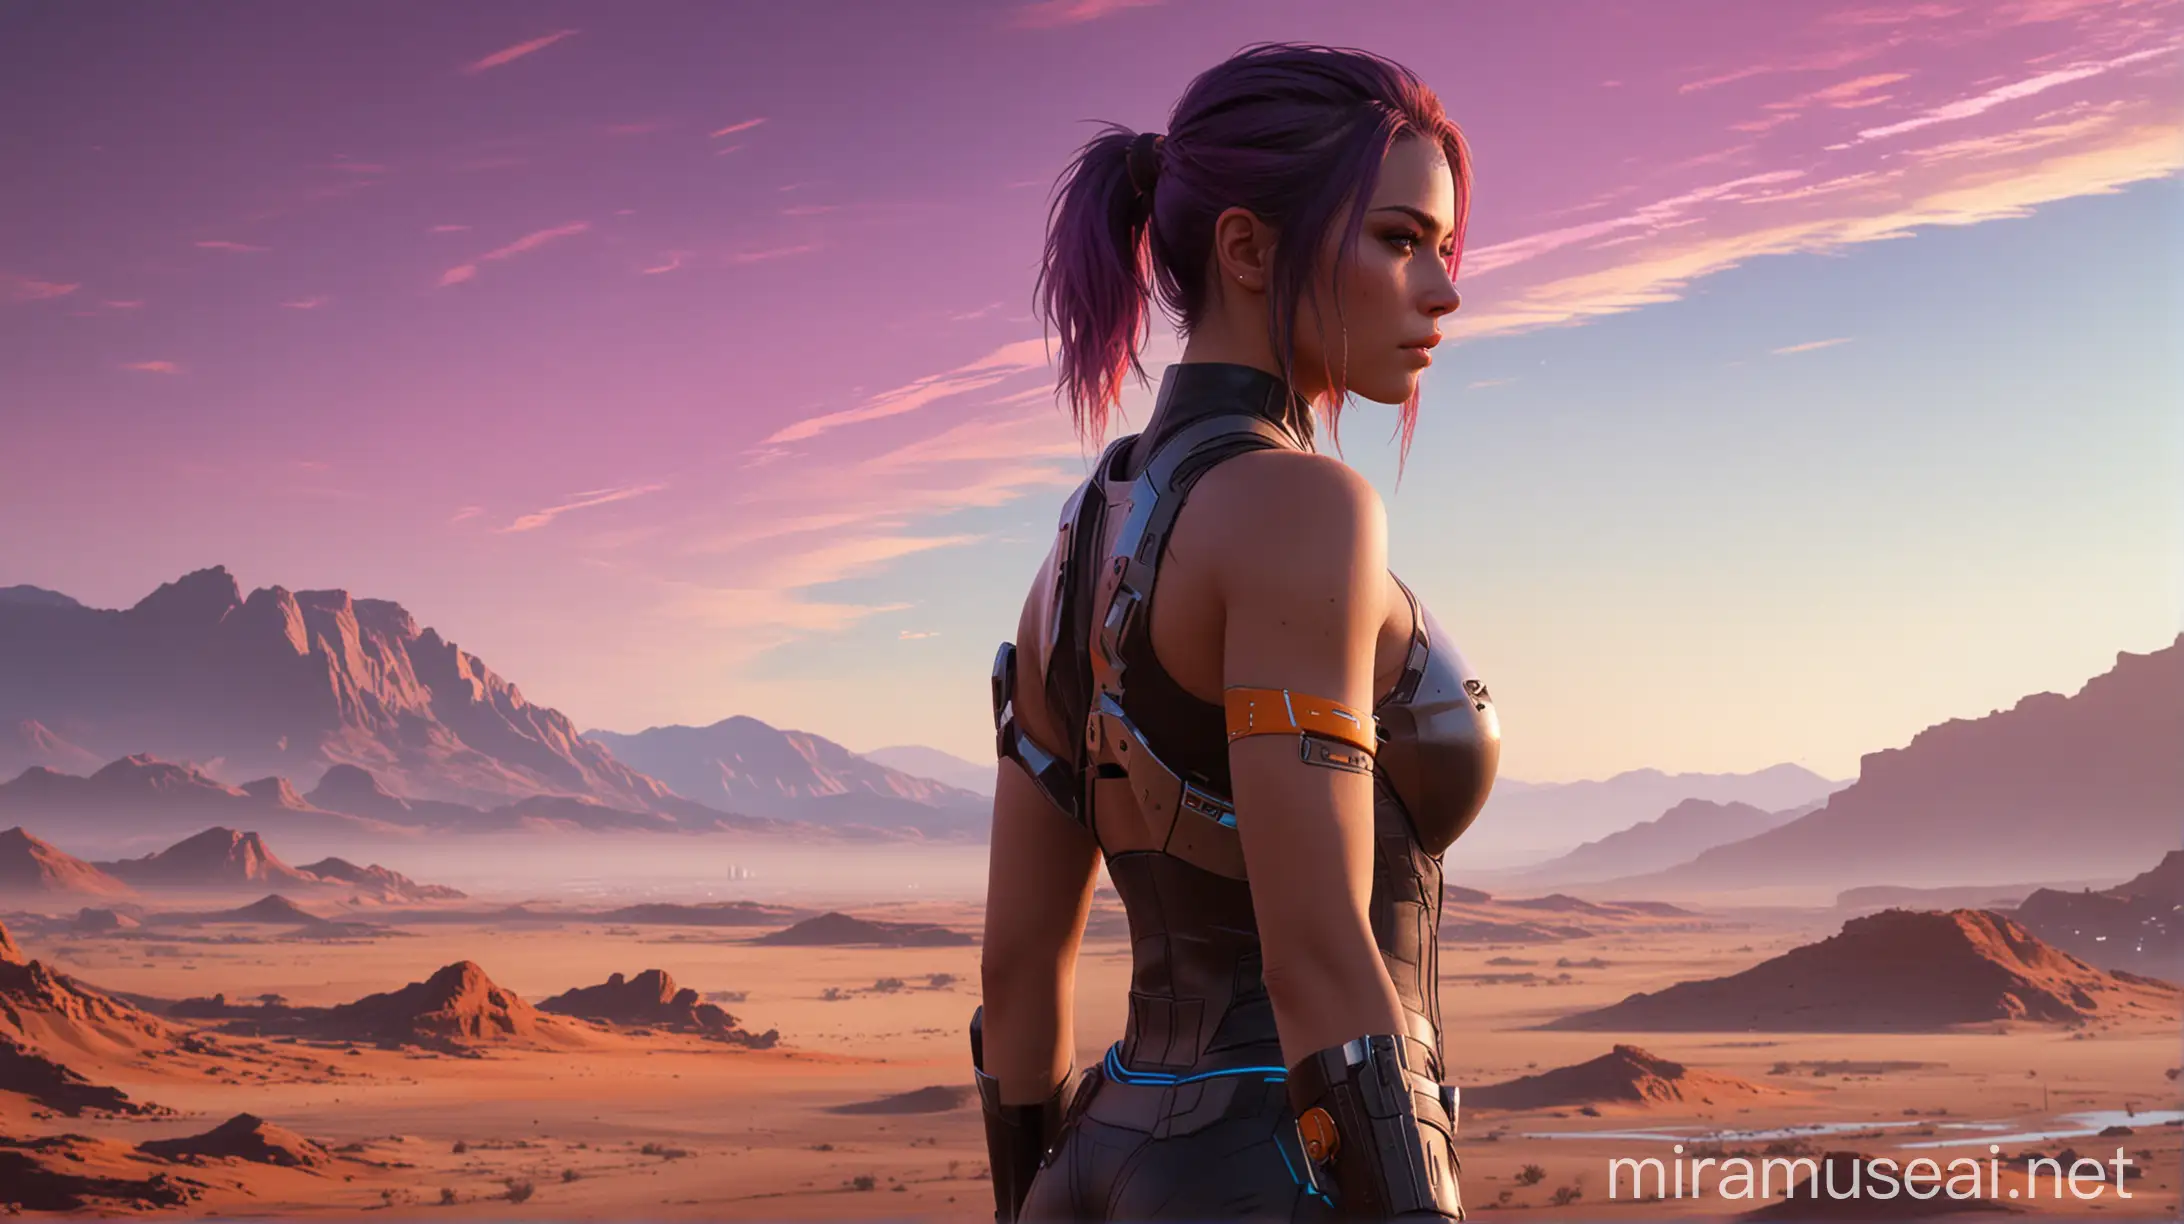 """
Create cover art inspired by Panam Palmer from Cyberpunk 2077. The artwork should depict a lone figure, resembling Panam, standing against a vast desert backdrop under a twilight sky. Emphasize her rugged and resilient appearance, reflecting her as a survivor and a warrior of the desert. The scene should capture the harsh beauty of the desert environment, using a palette of deep oranges, purples, and blues to convey both the toughness and the freedom represented by her character. The figure should be portrayed in a contemplative pose, looking off into the distance, with subtle hints of futuristic elements to tie back to her origins from Cyberpunk 2077.
"""